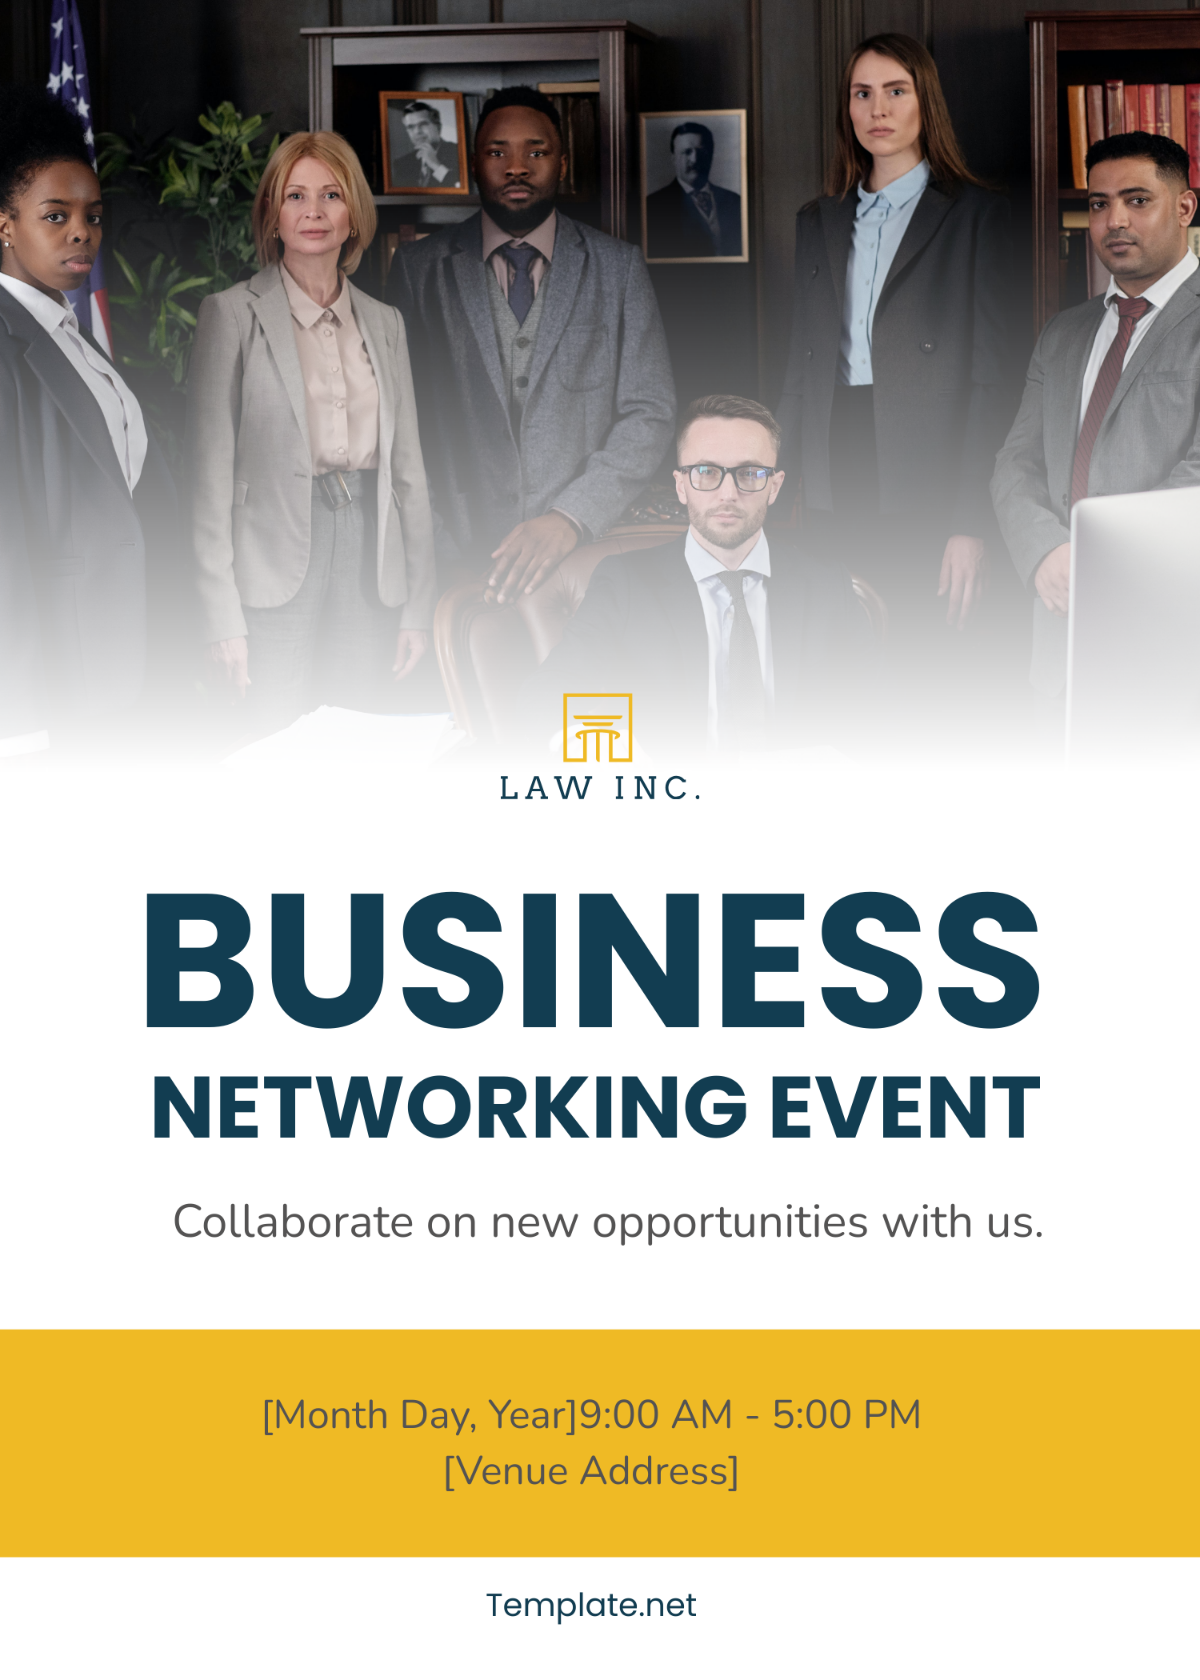 Law Firm Business Invitation